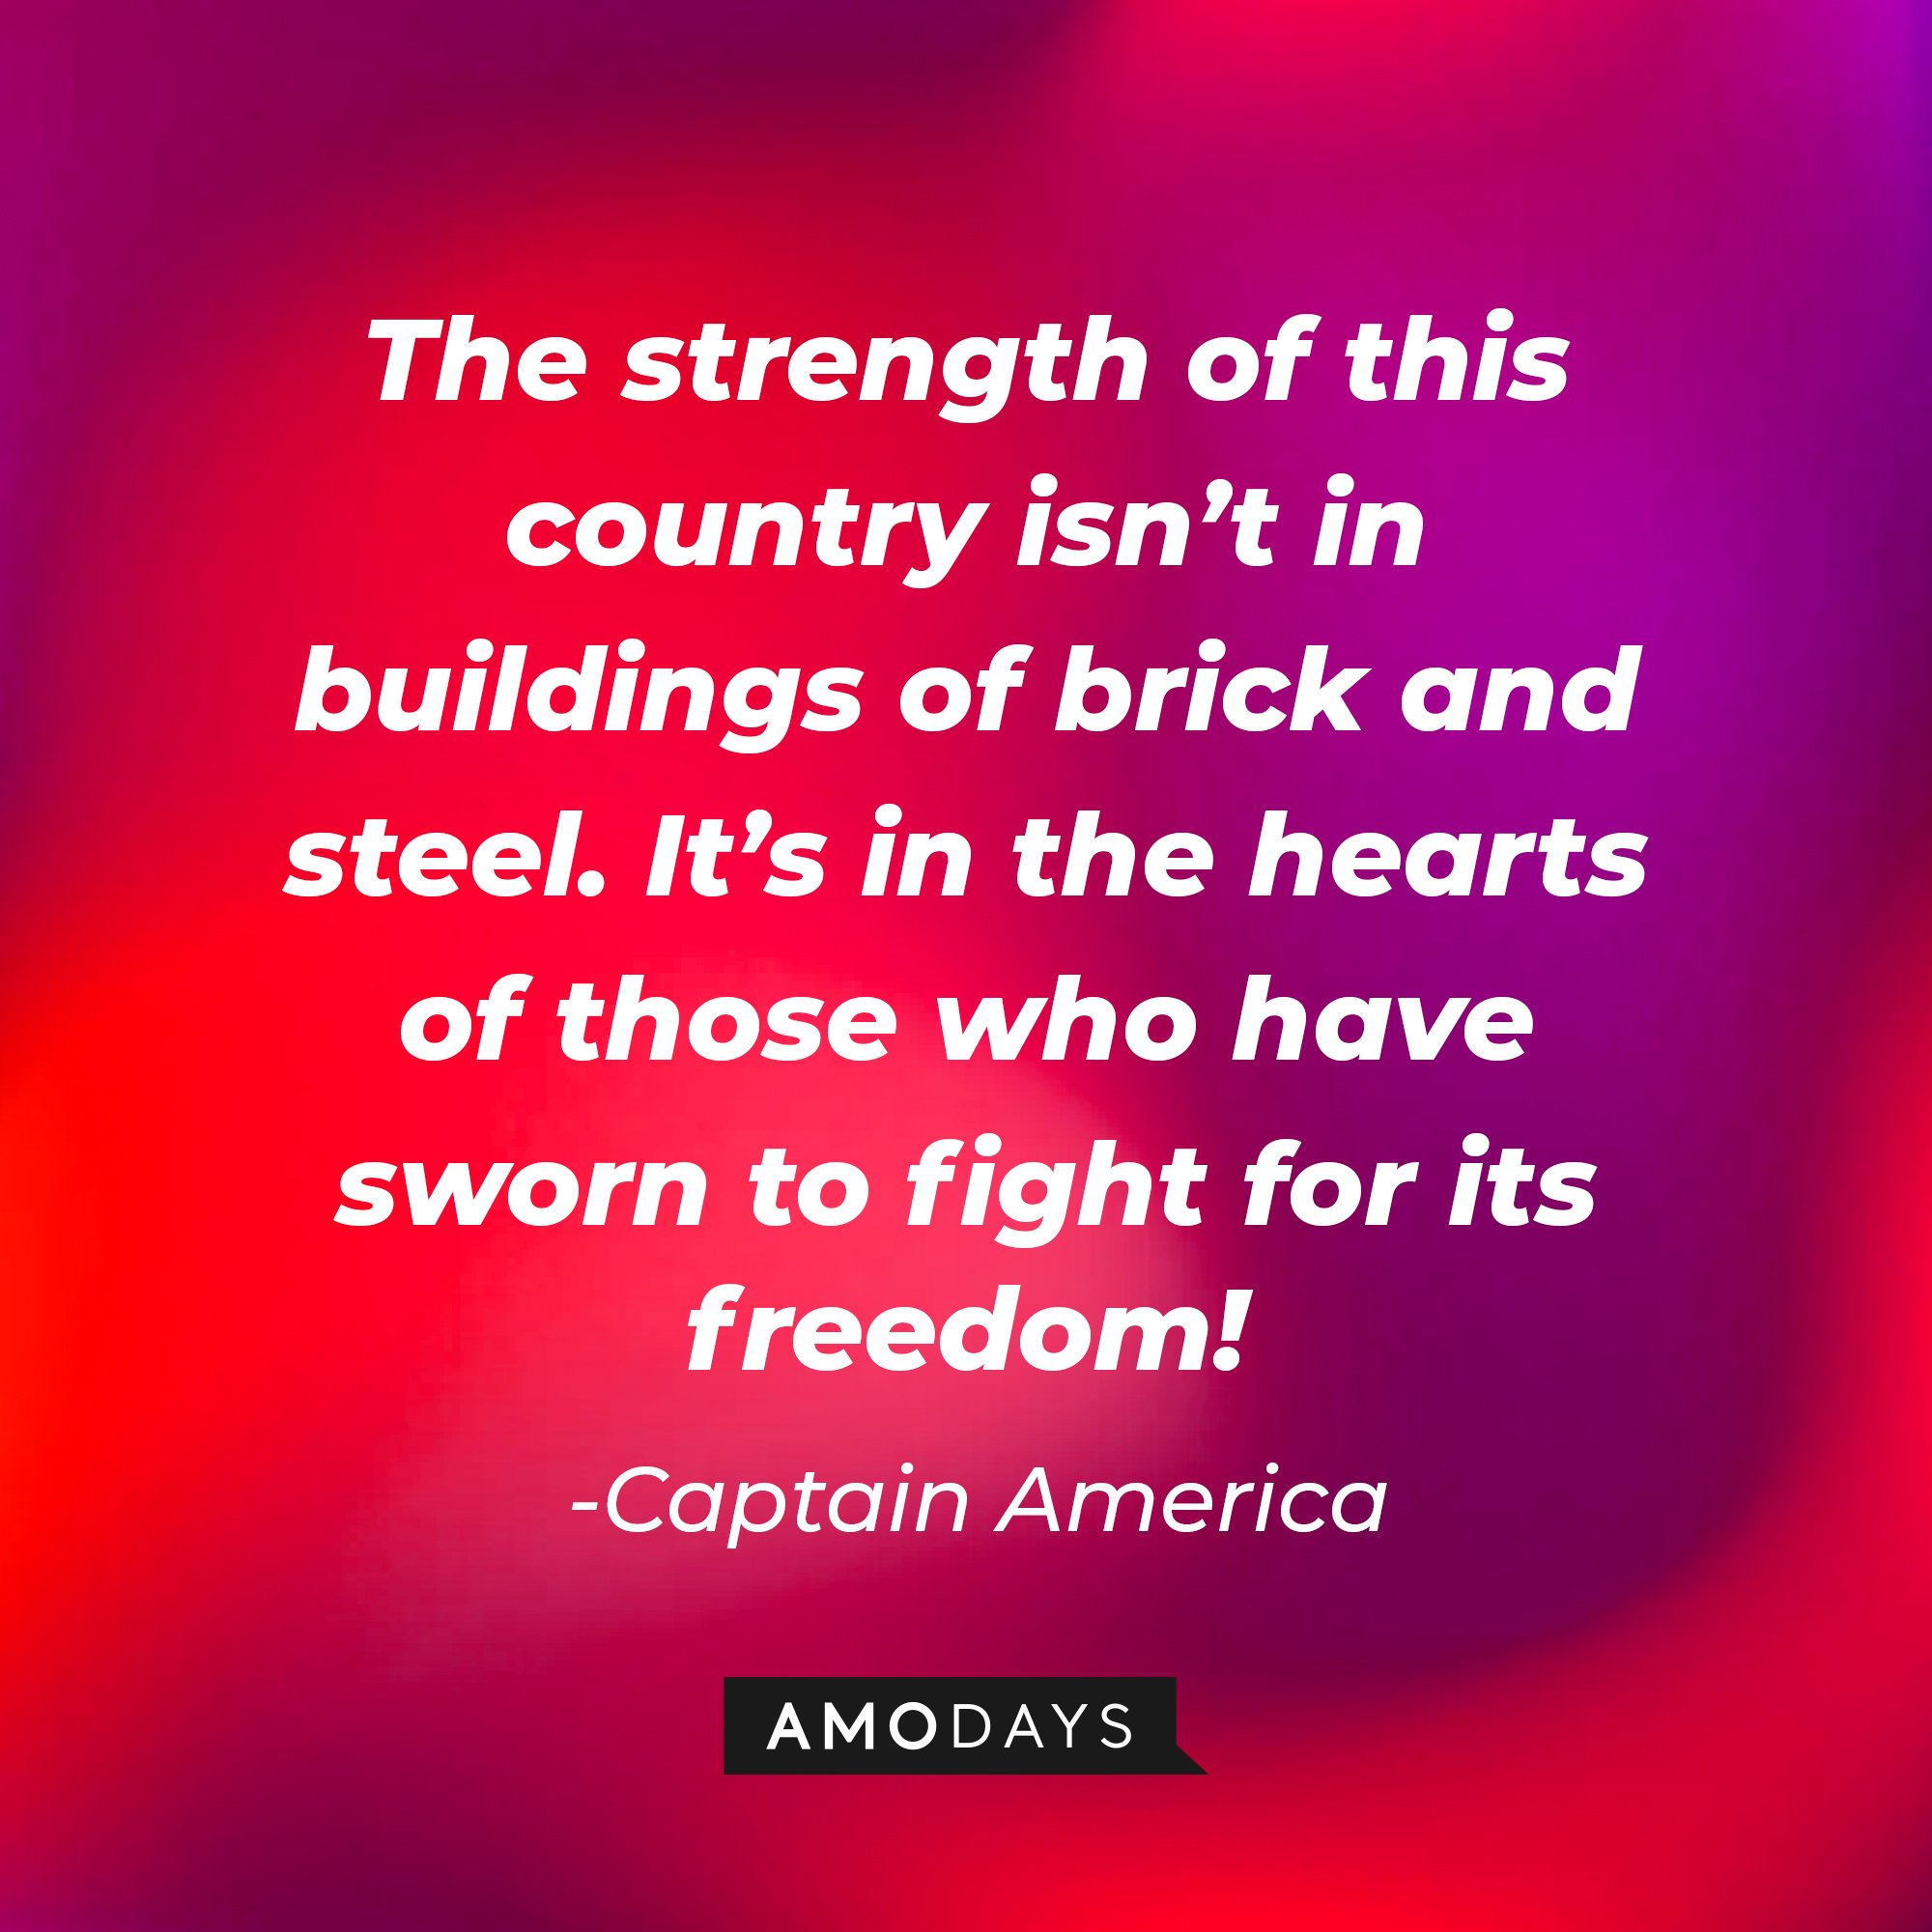 Captain America's quote: "The strength of this country isn’t in buildings of brick and steel. It’s in the hearts of those who have sworn to fight for its freedom!" | Image: AmoDays